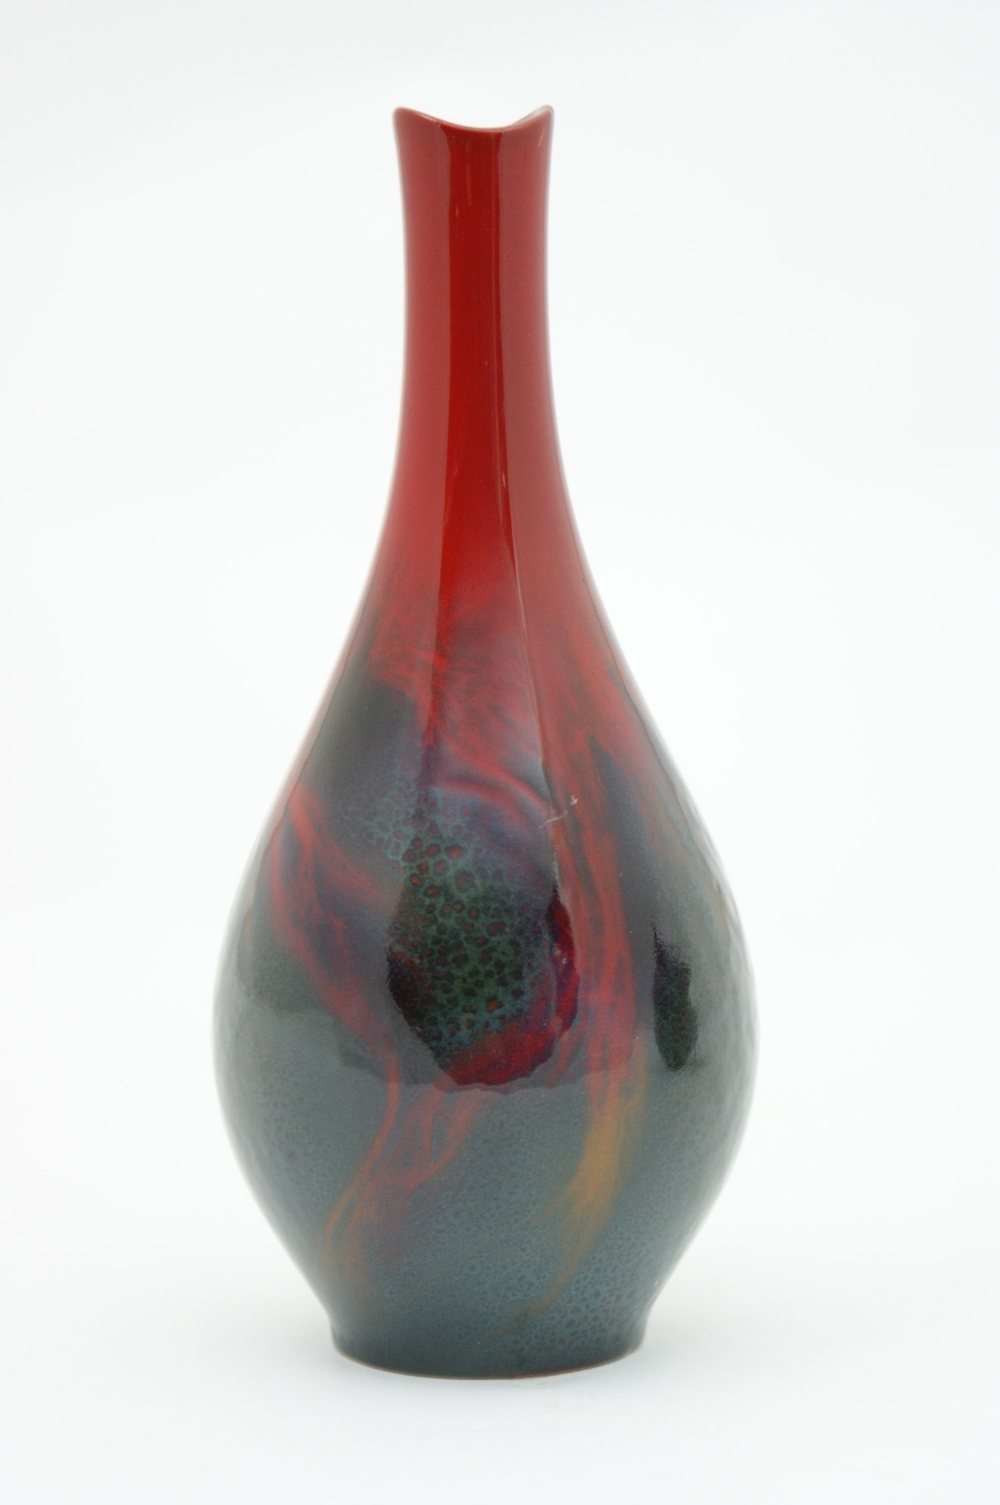 Royal Doulton veined flambe vase, ovoid form with a trumpet neck, printed marks, 20.5cm